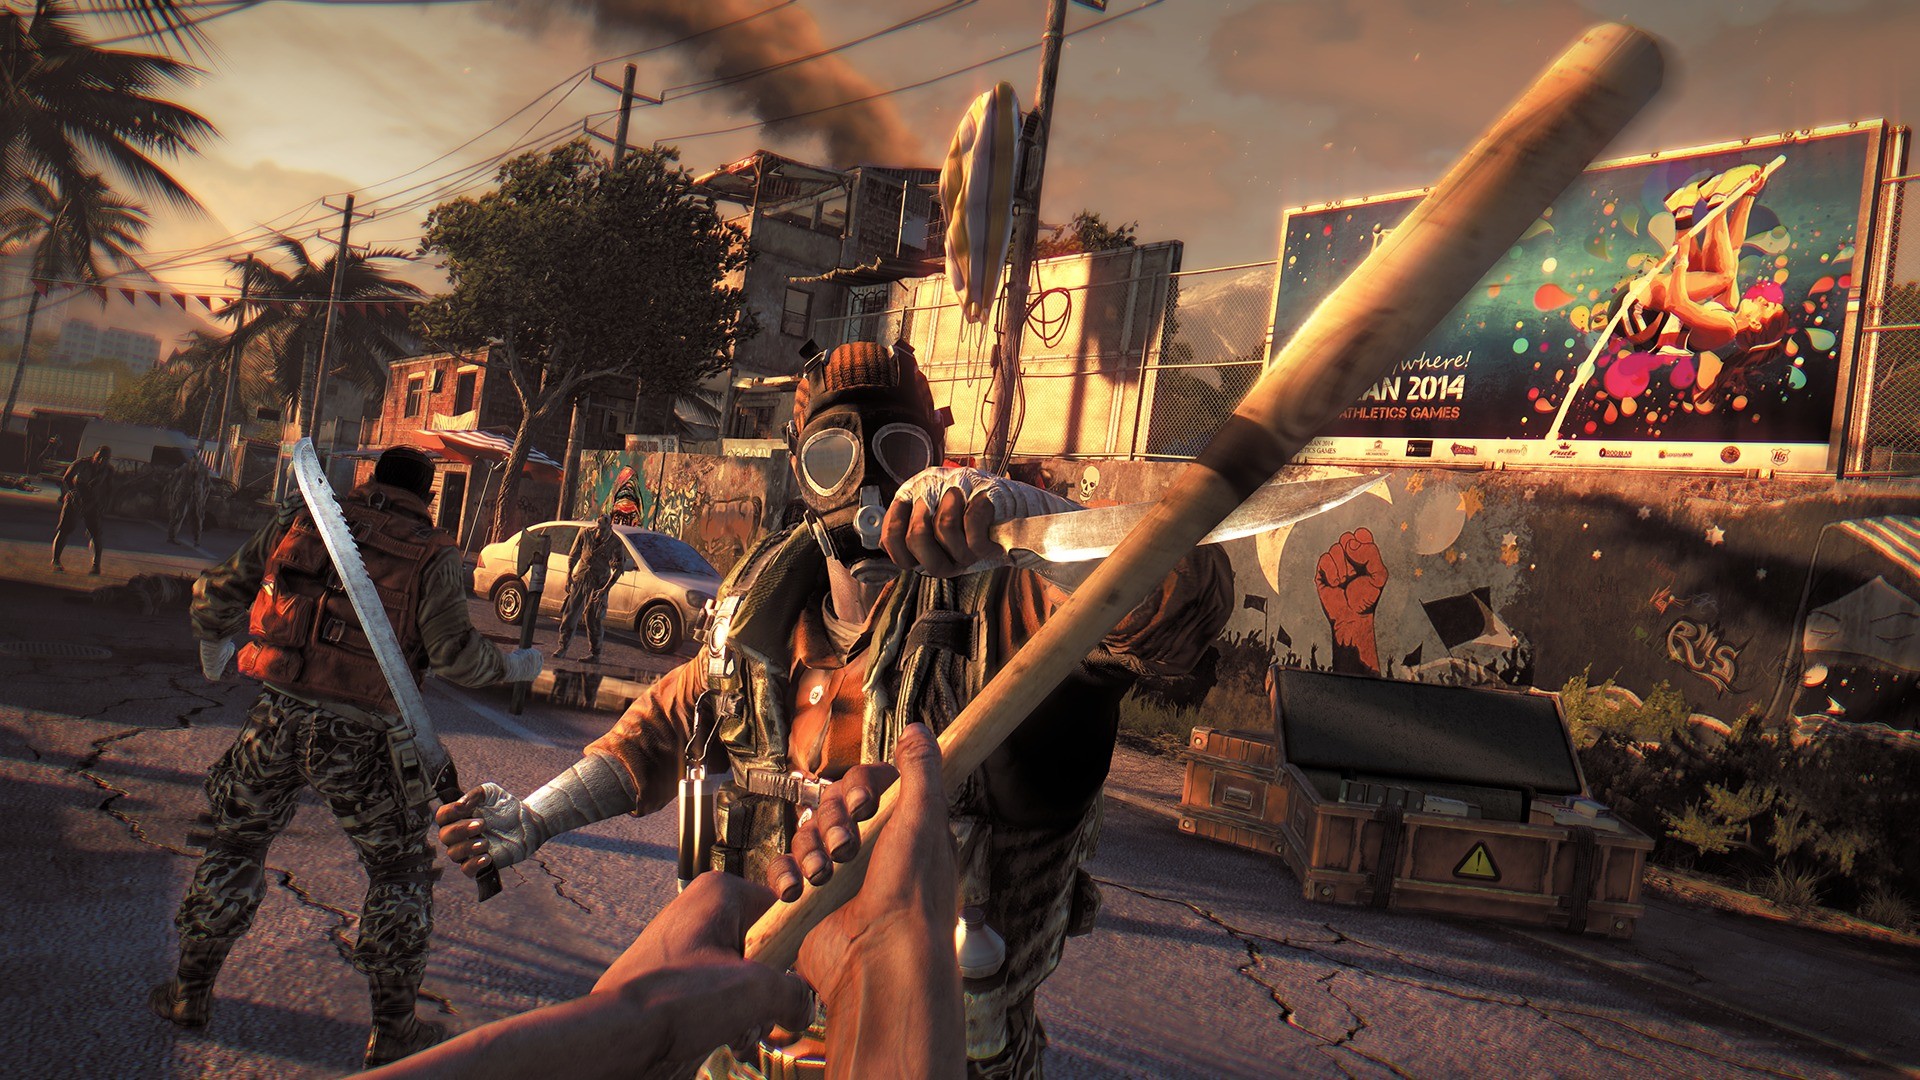 Dying Light Free Game Download PC Full Version